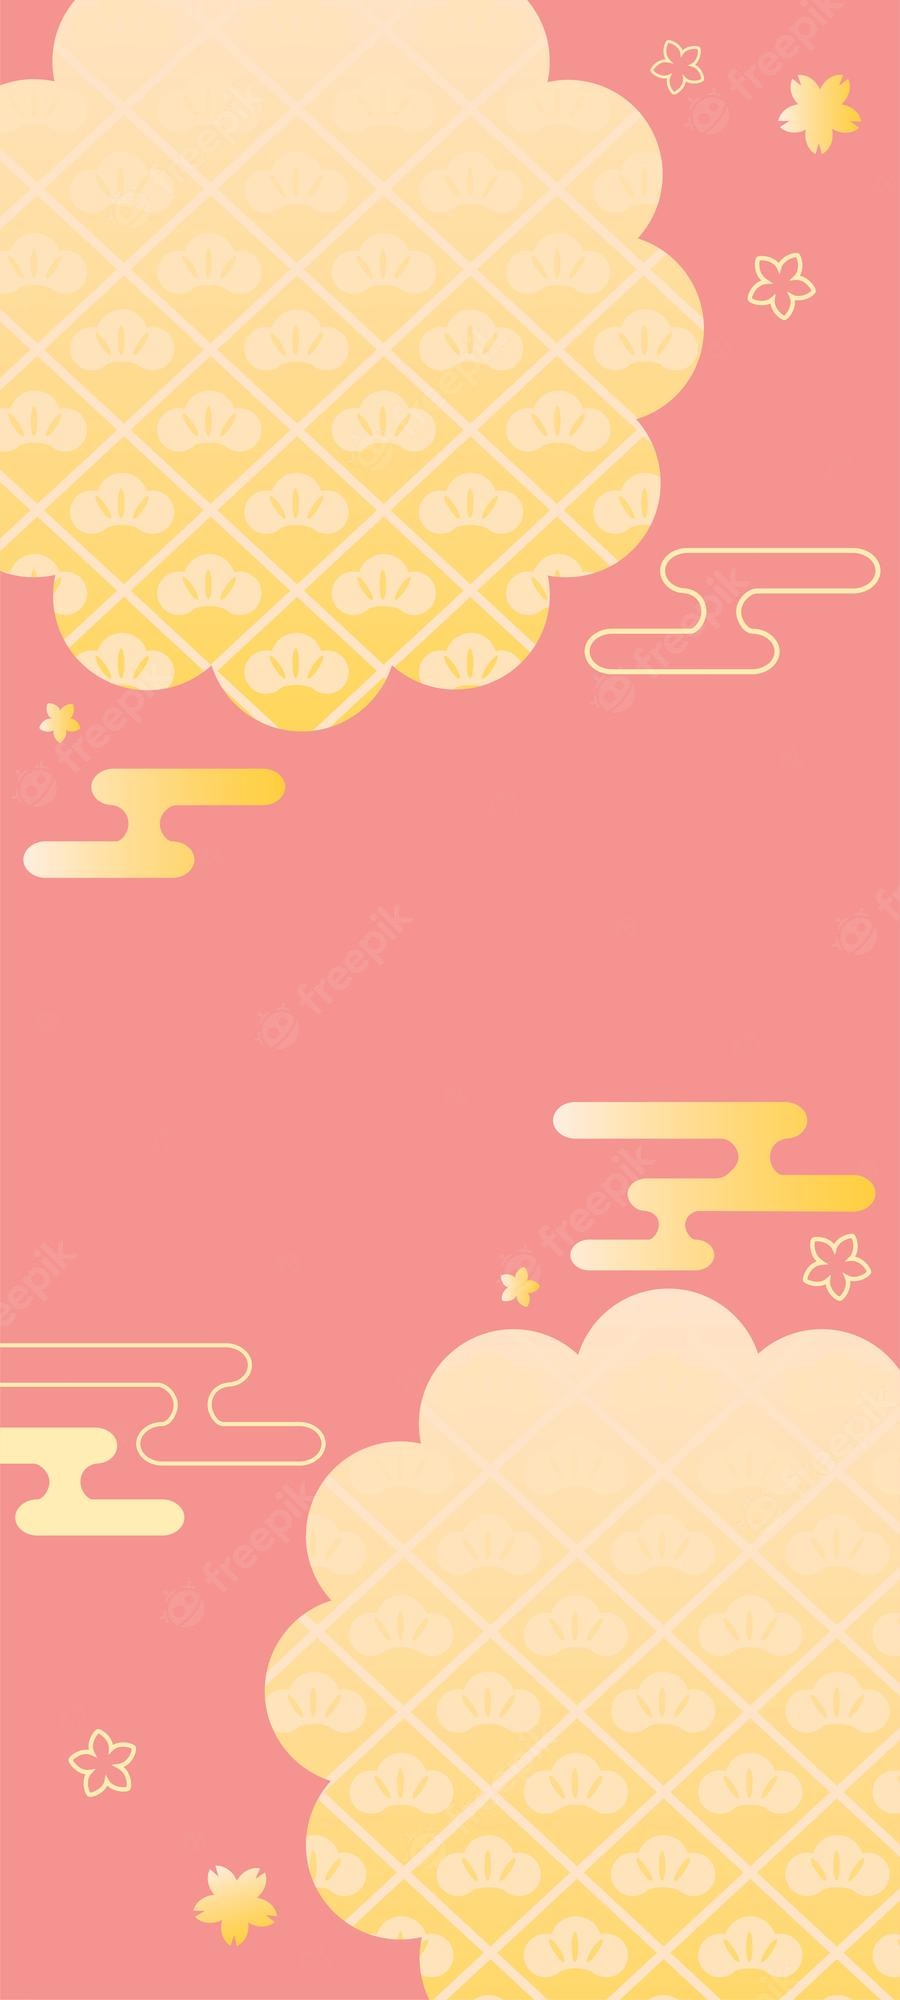 A yellow and pink background with clouds - Japanese